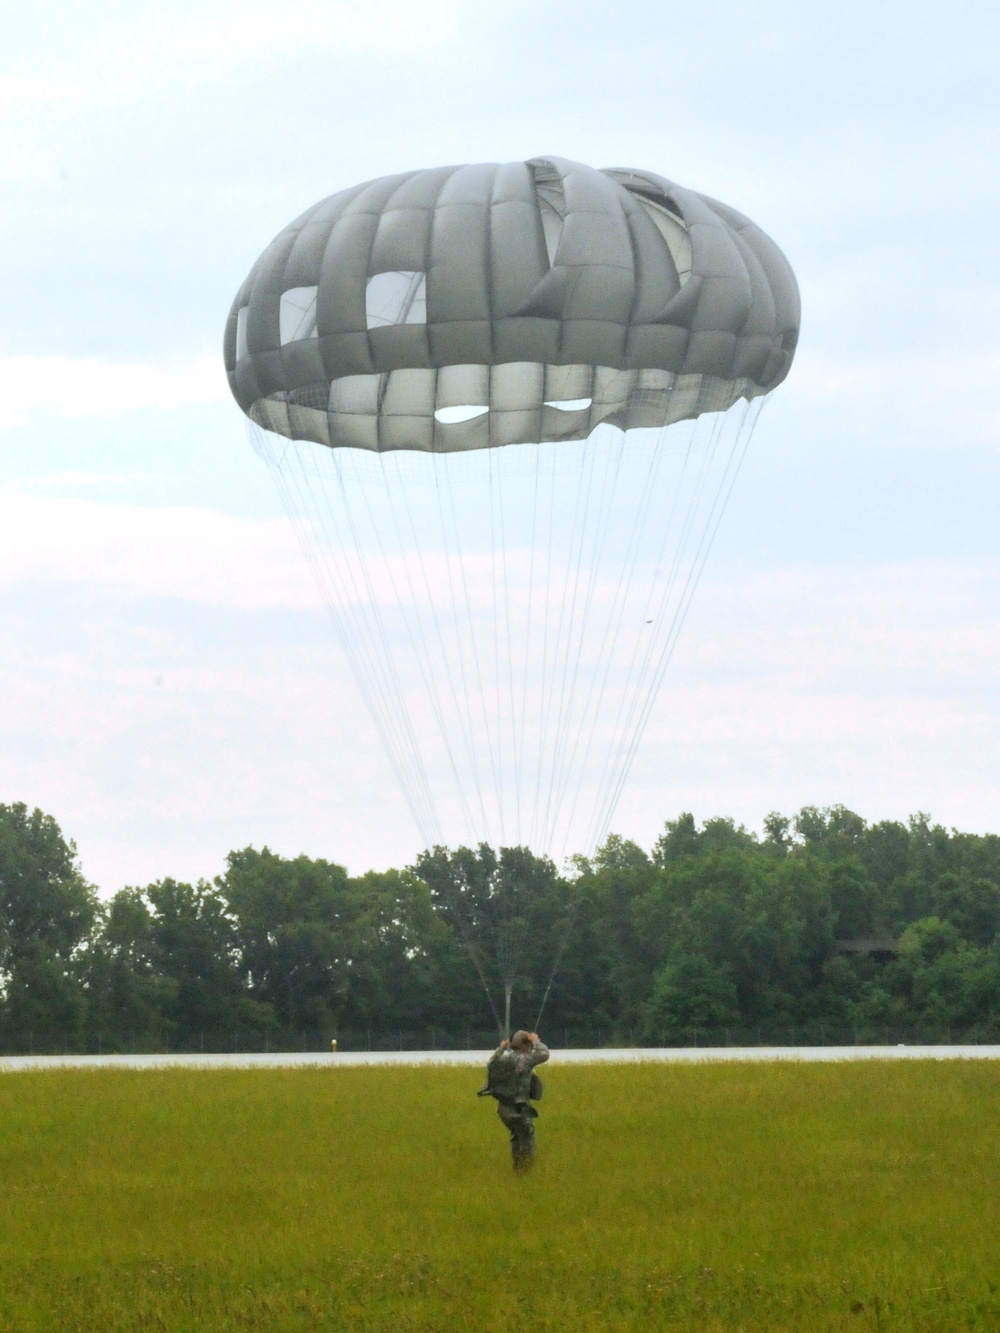 Jumping into their work: Ohio Special Forces unit conducts parachute jump